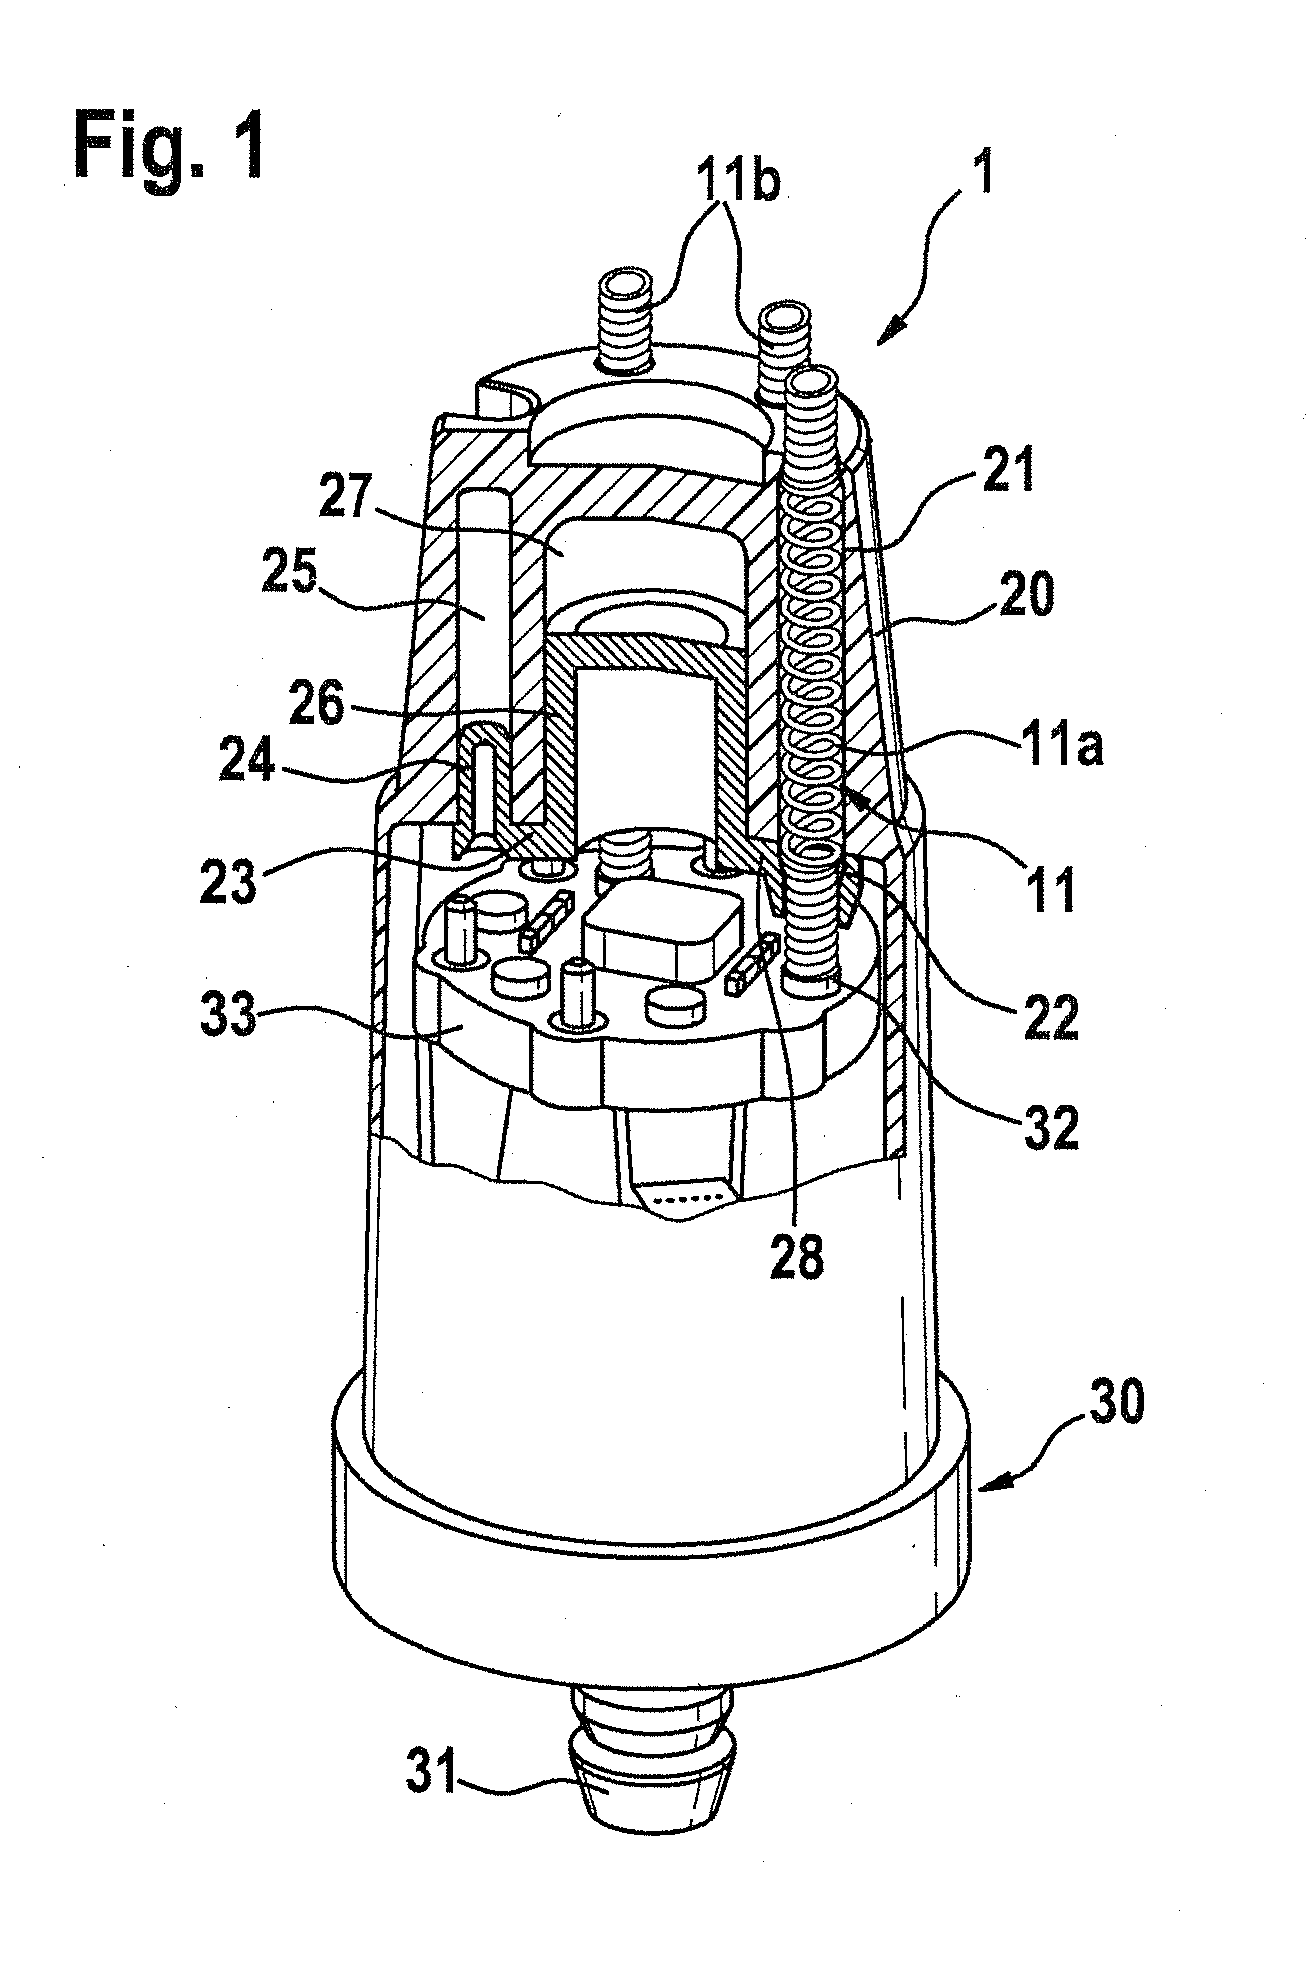 Pre-installation assembly for a contact arrangement of a sensor assembly